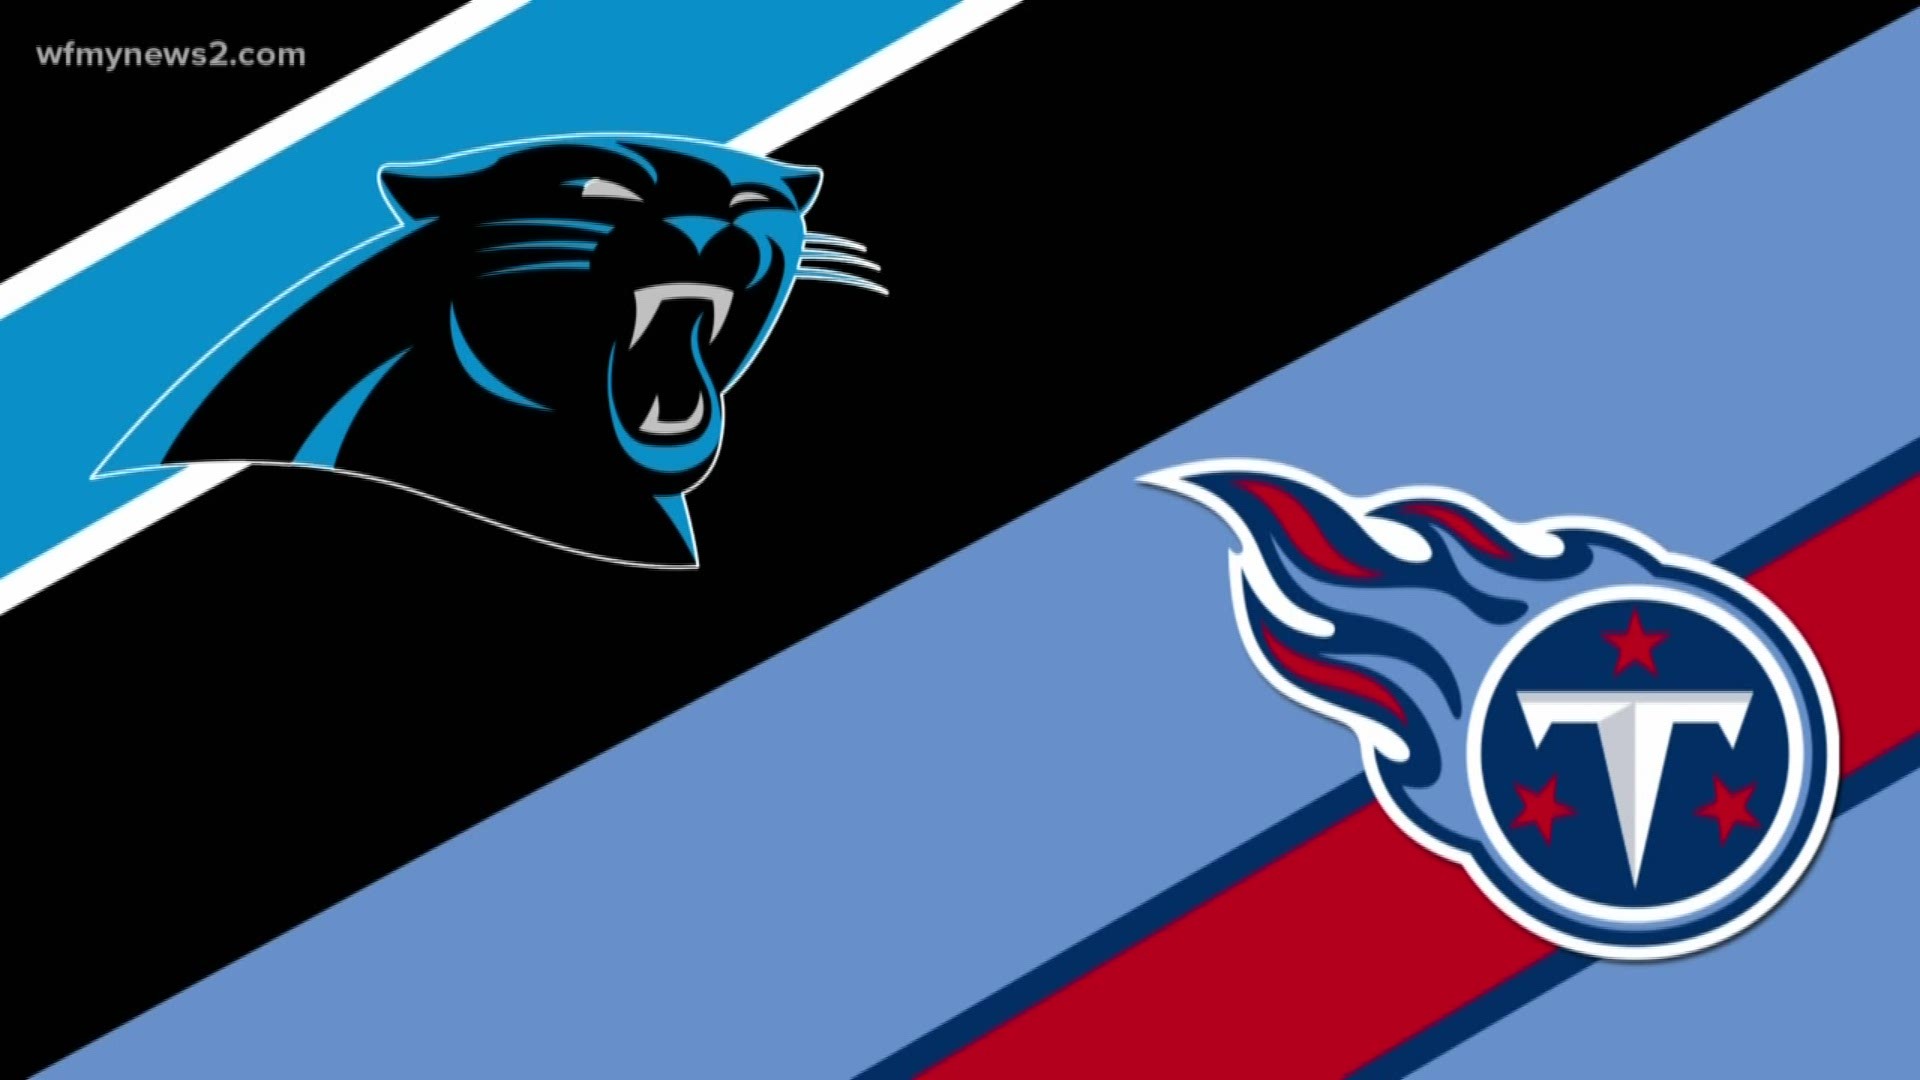 Panthers are coming off their worst loss of the season, but they're ready to get back in the win column at home against the Titans.